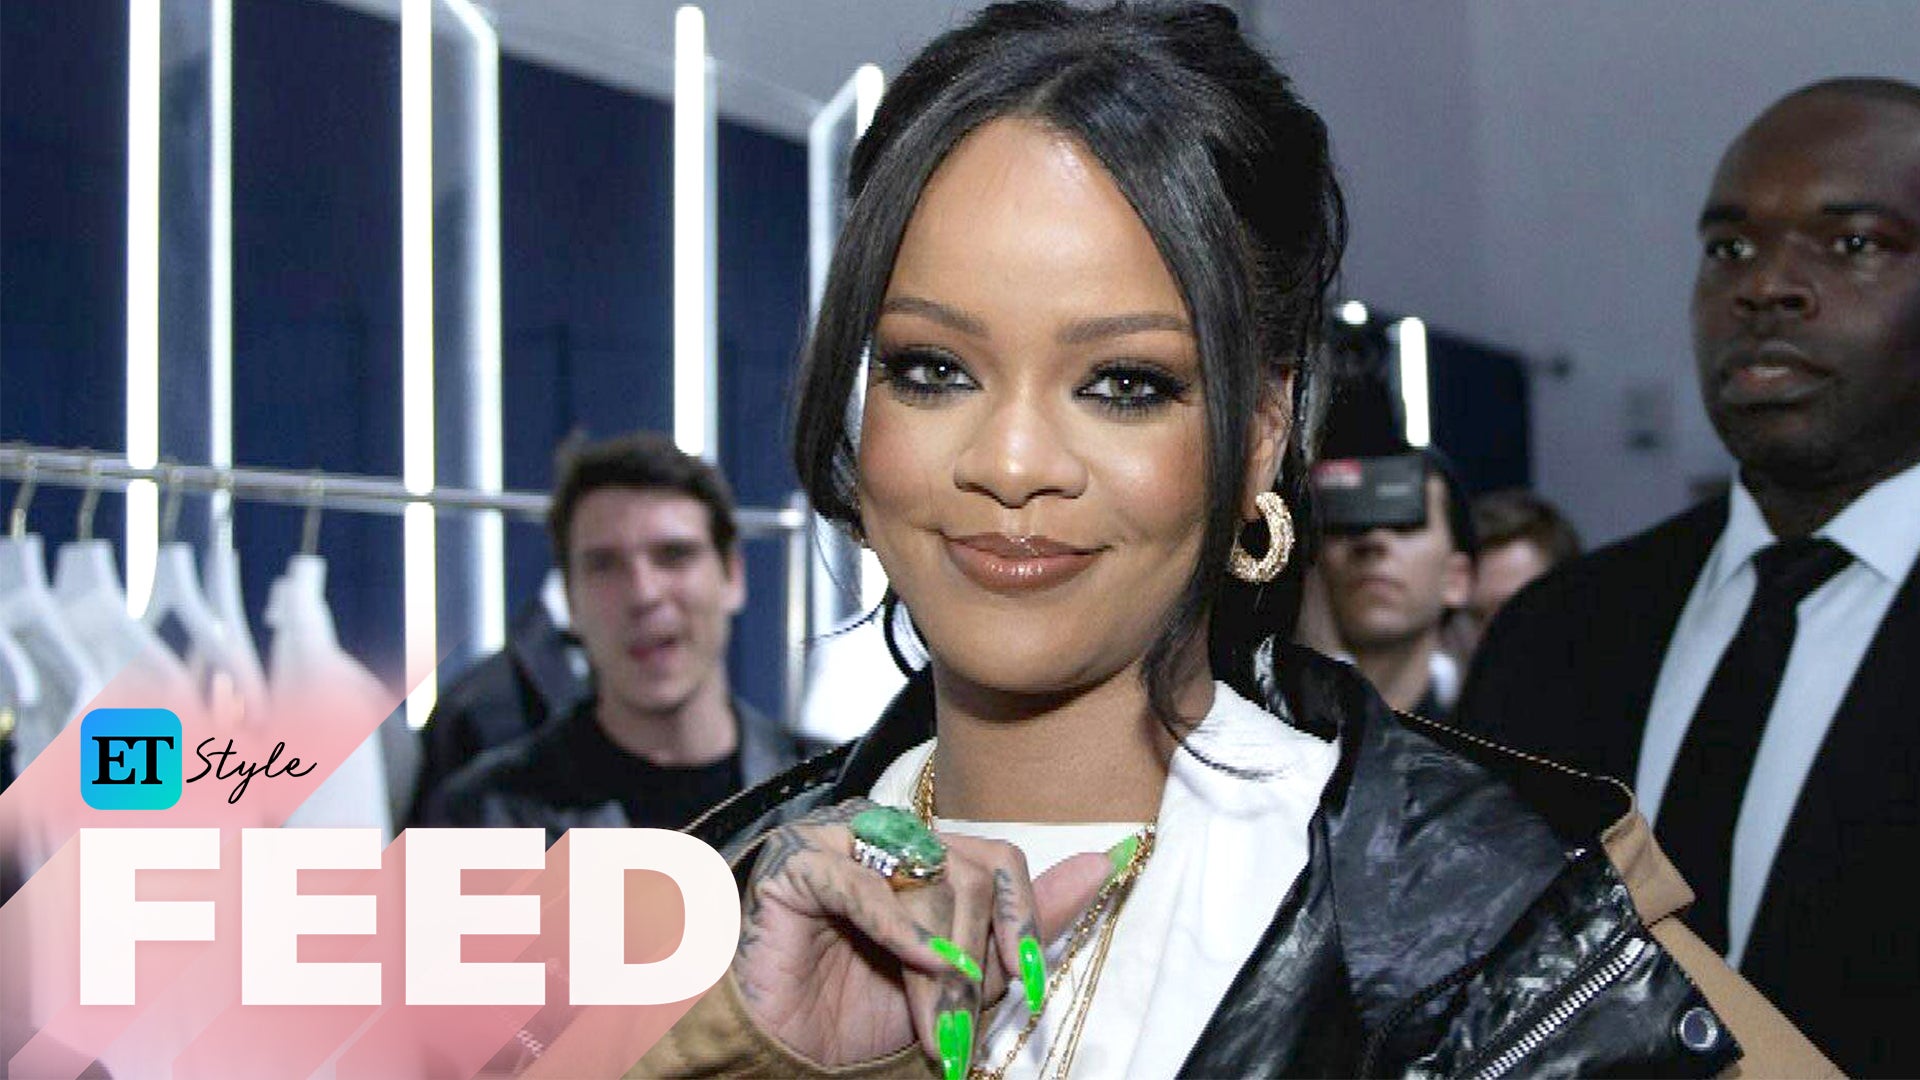 Your first look at Rihanna's new high-fashion line, Fenty